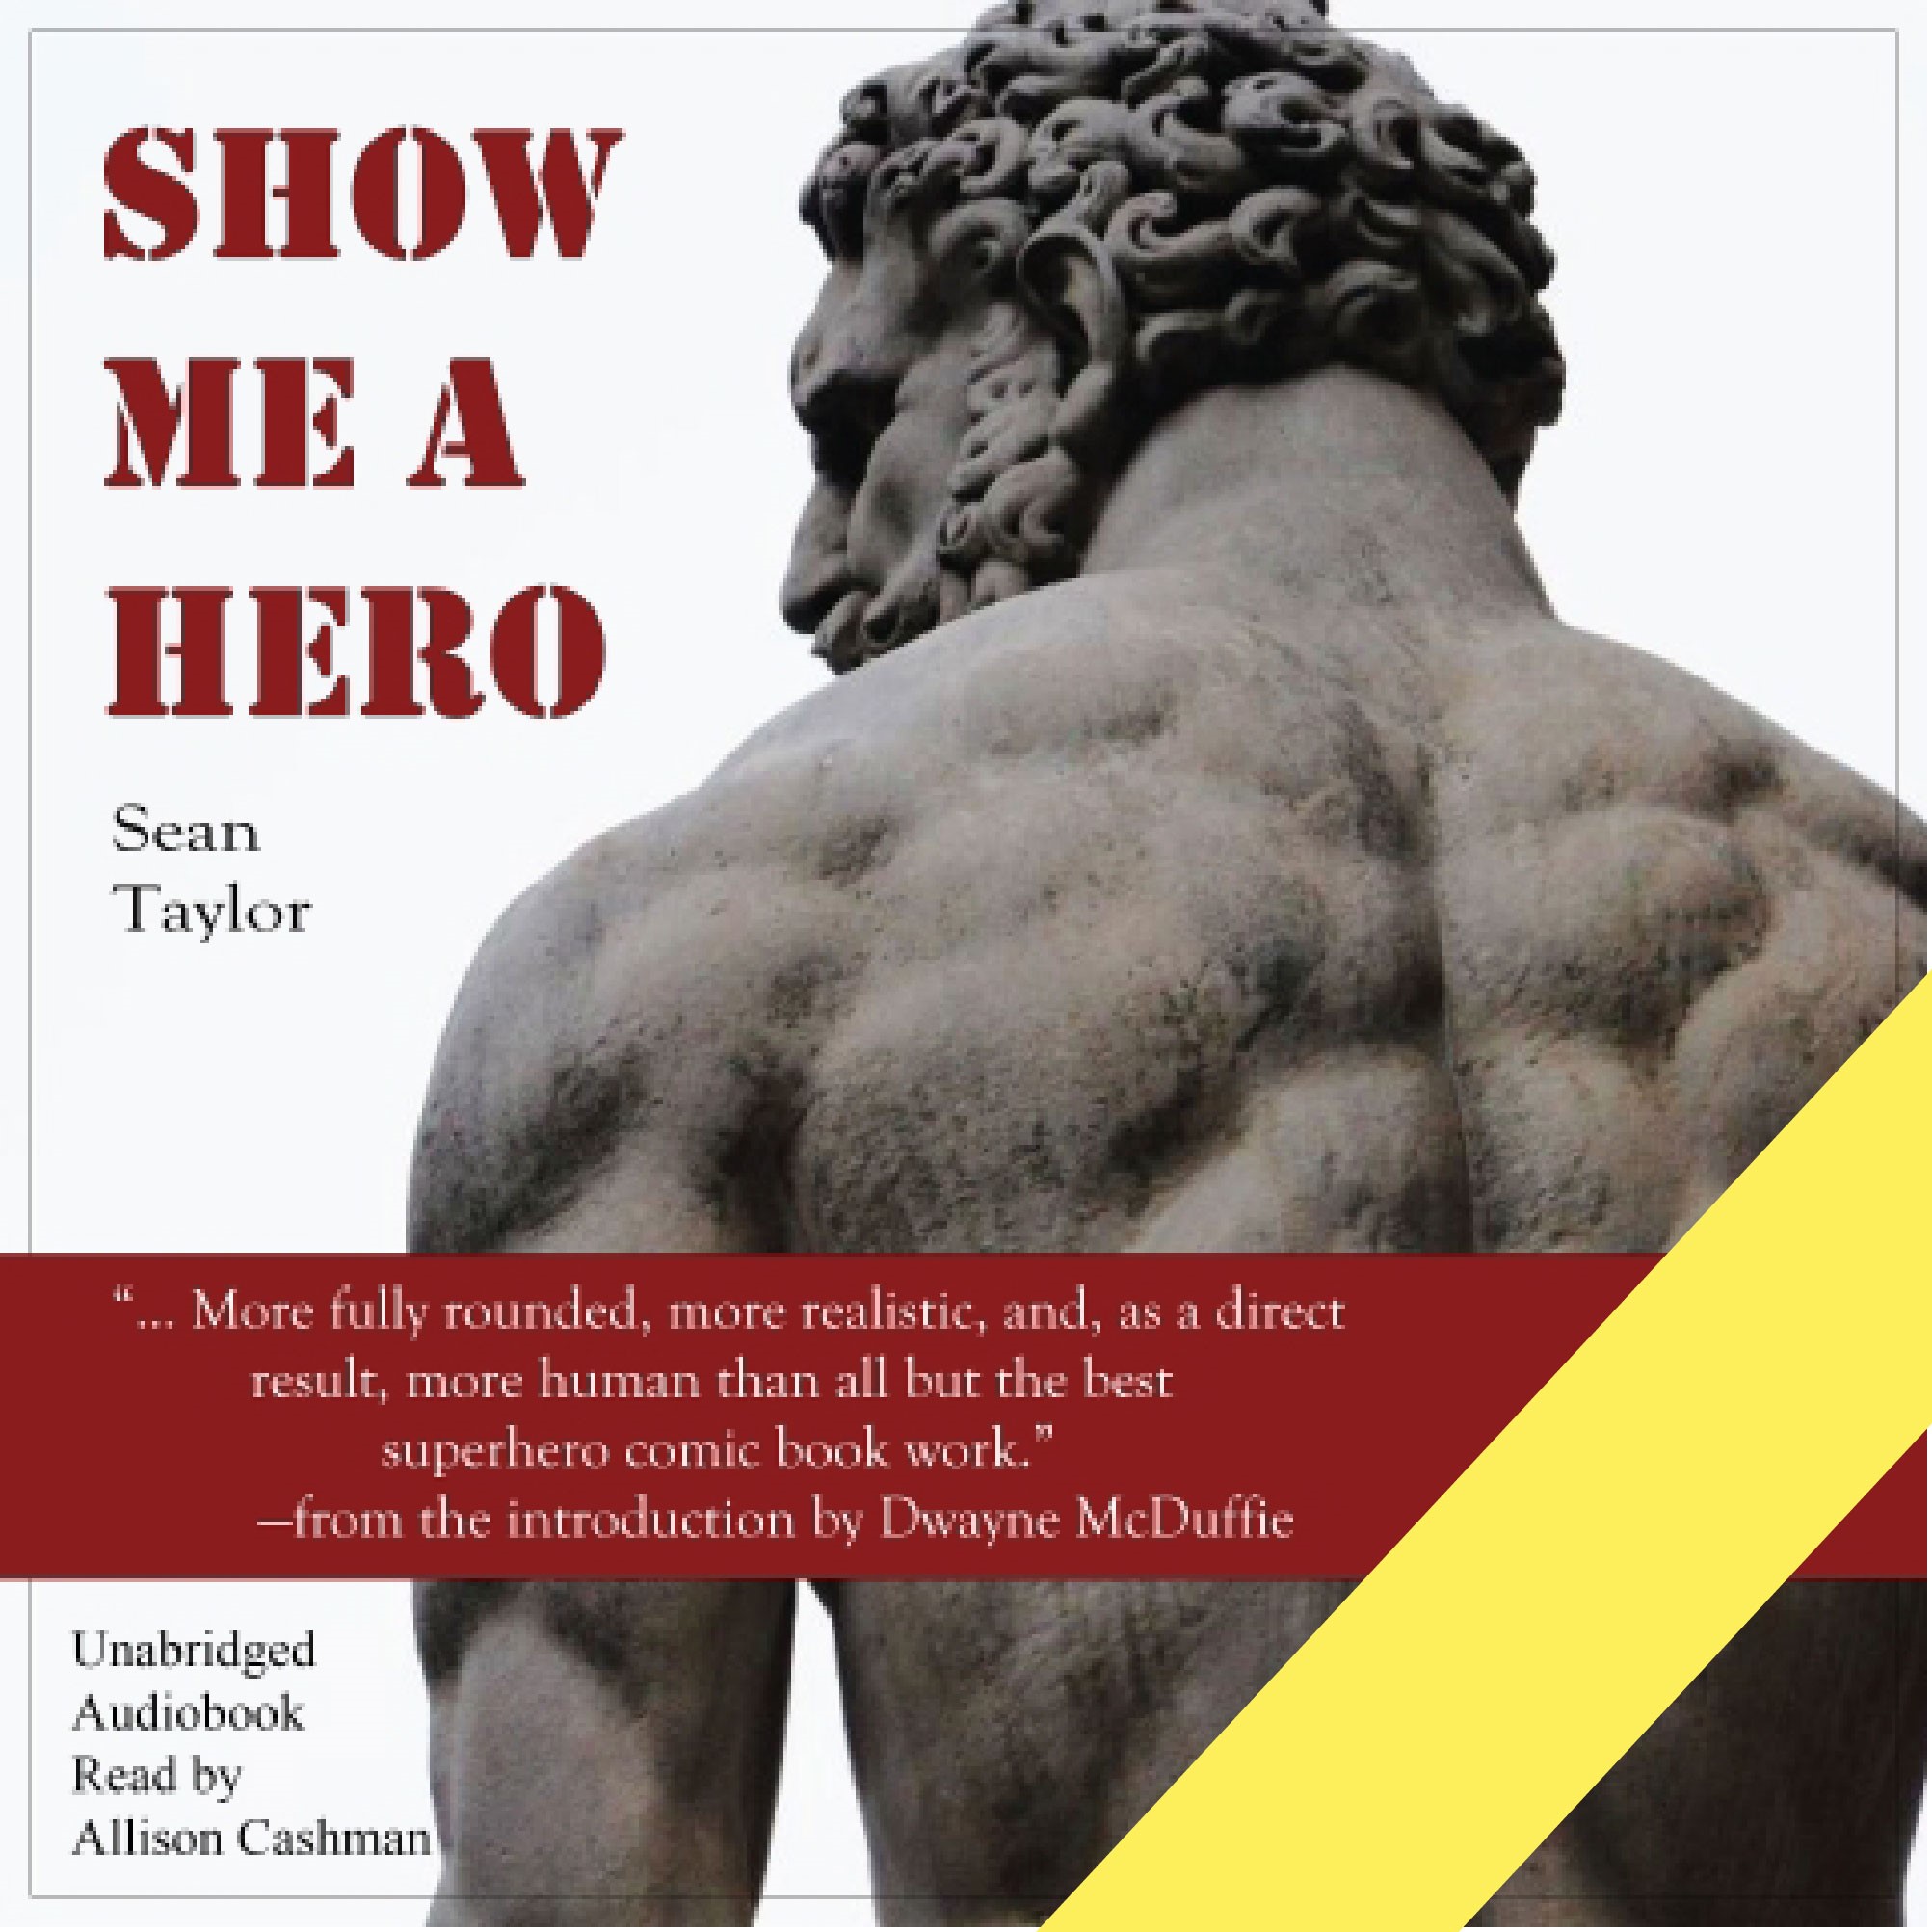 The Long-Awaited SHOW ME A HERO audiobook is finally available!